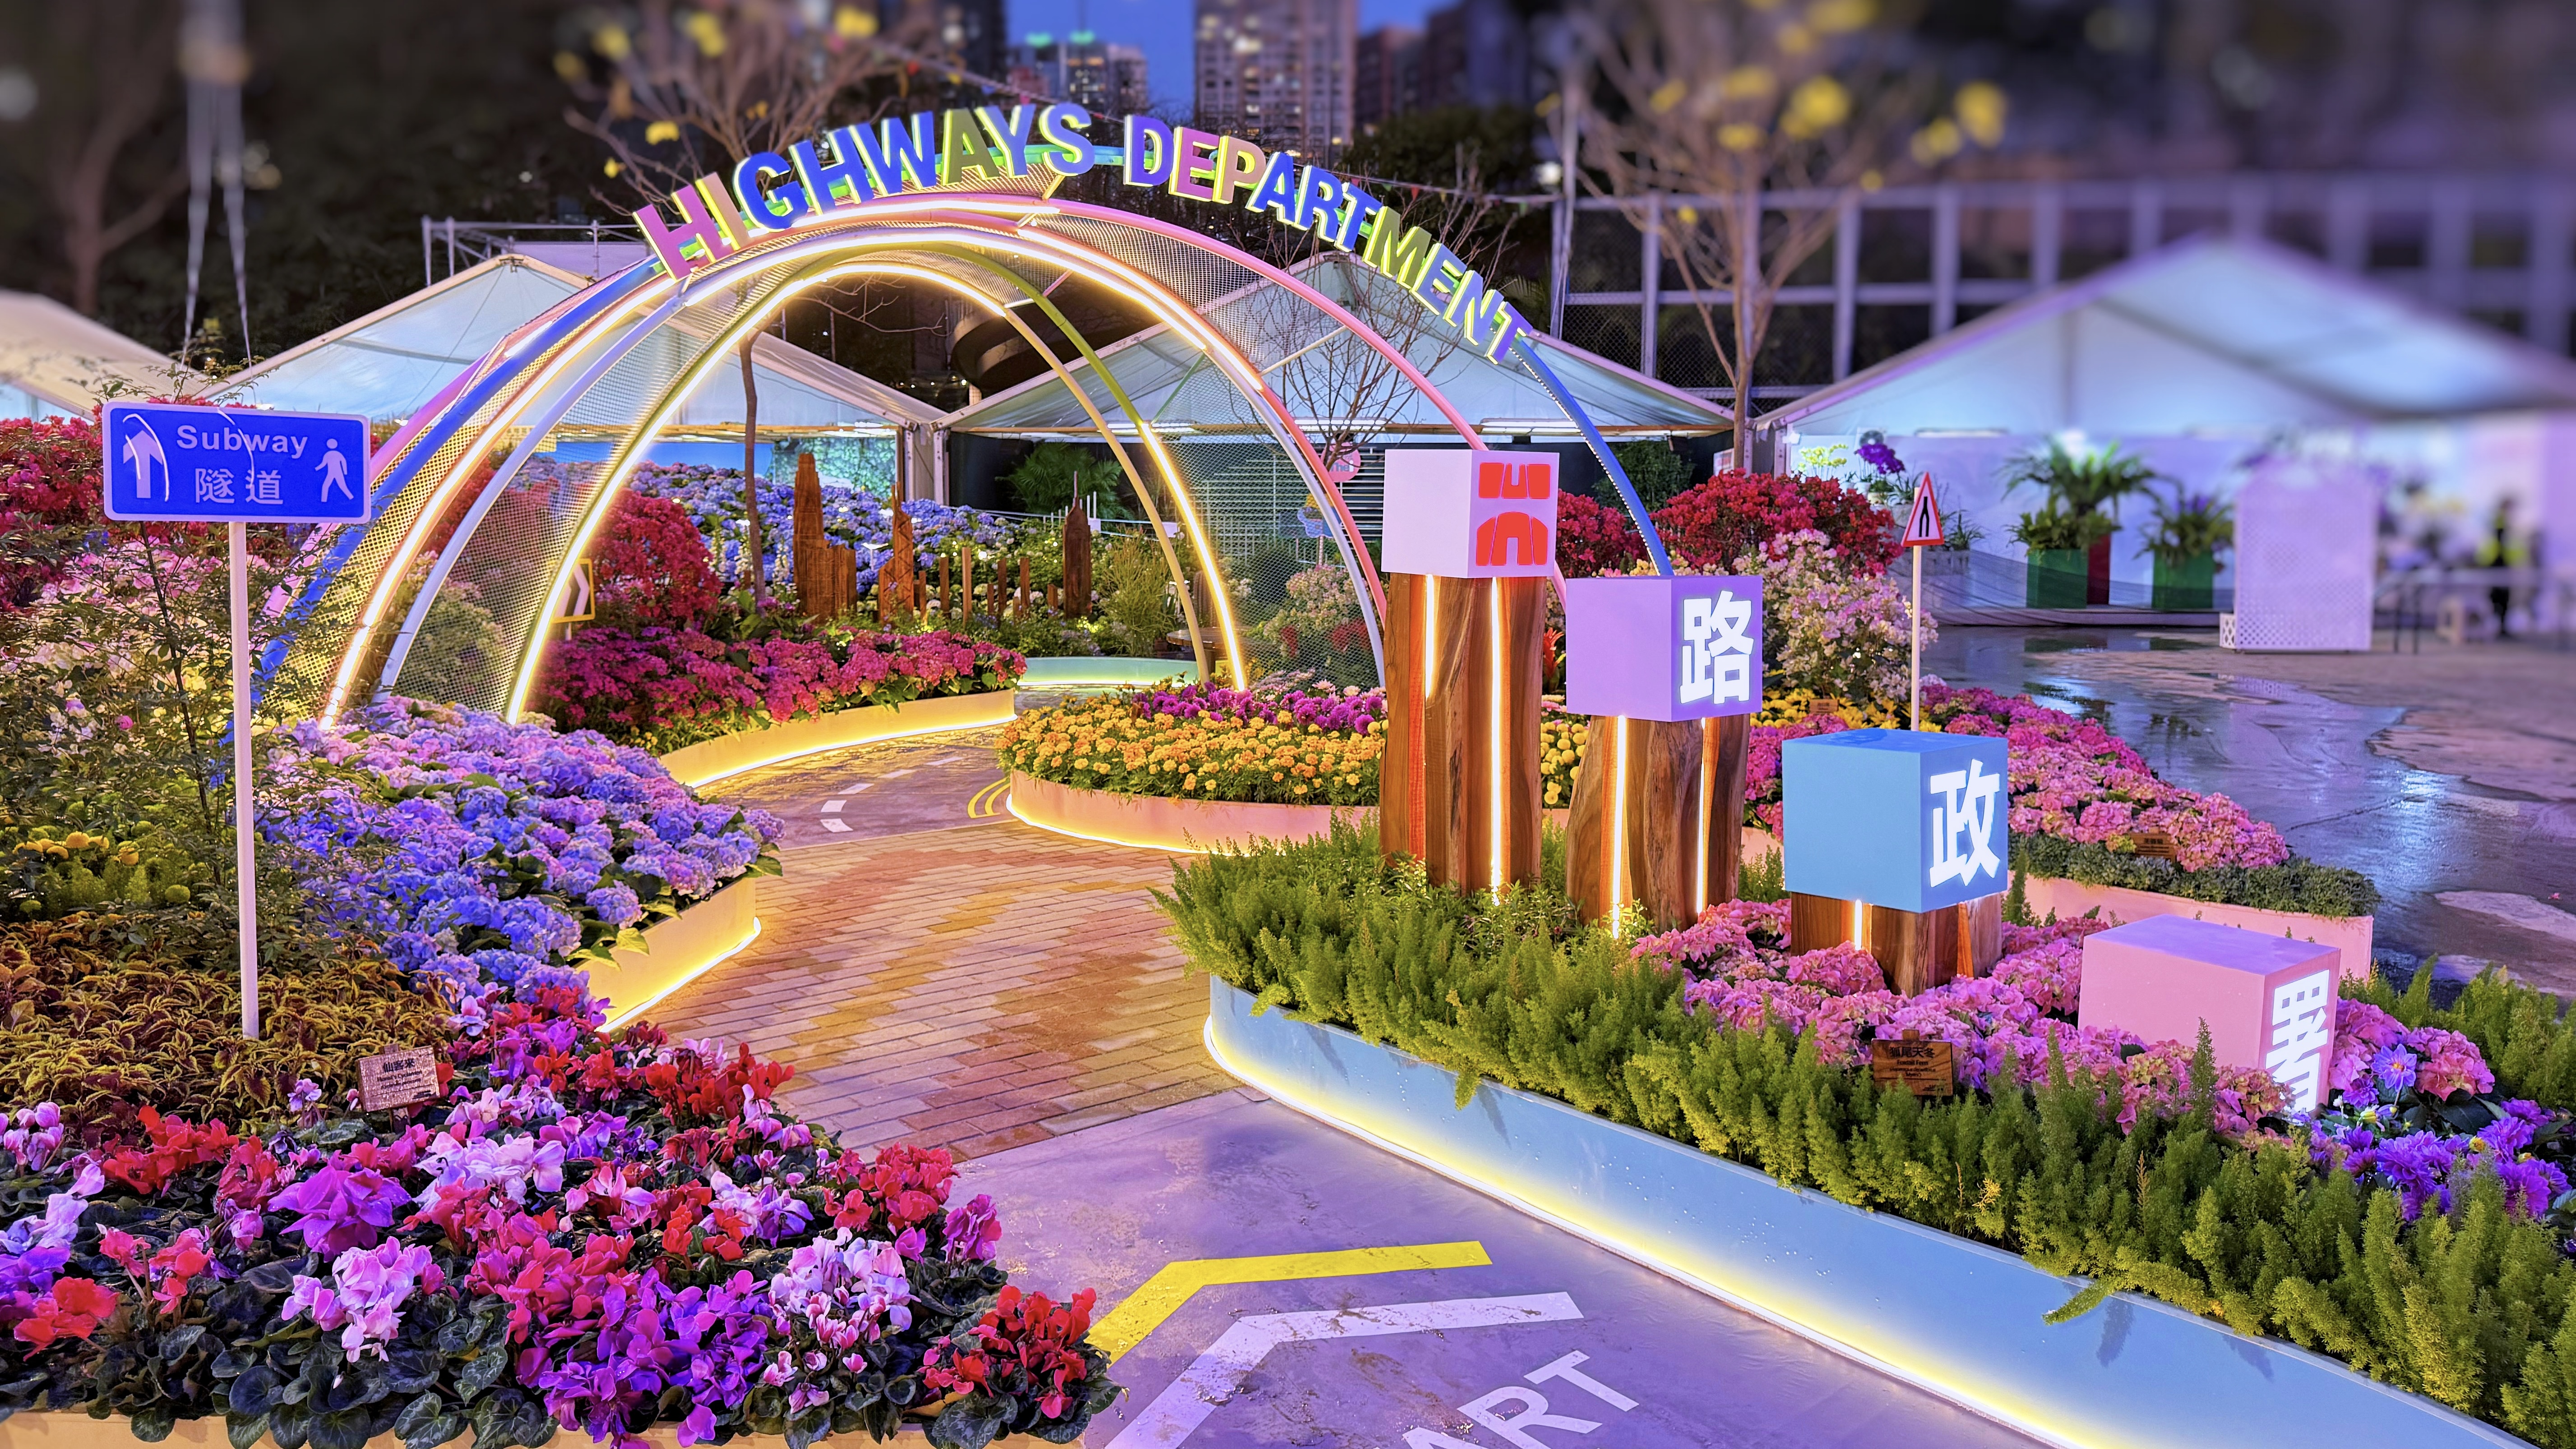 Hong Kong Flower Show 2024 Display Section (Local) - Grand Award for Design Excellence (Landscape Display)